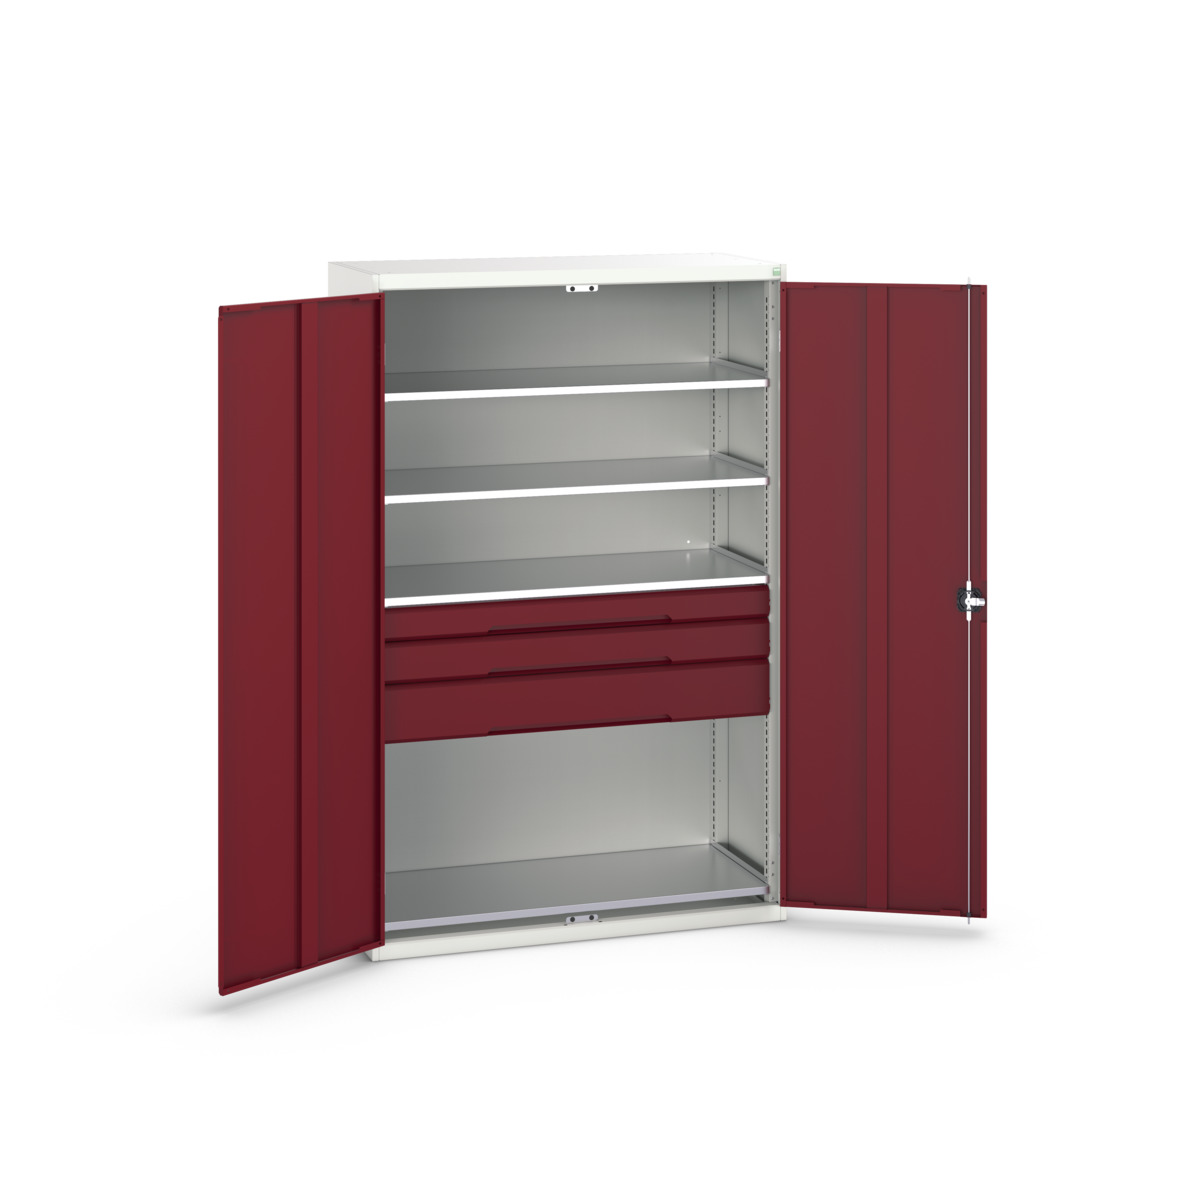 16926655.24 - verso kitted cupboard